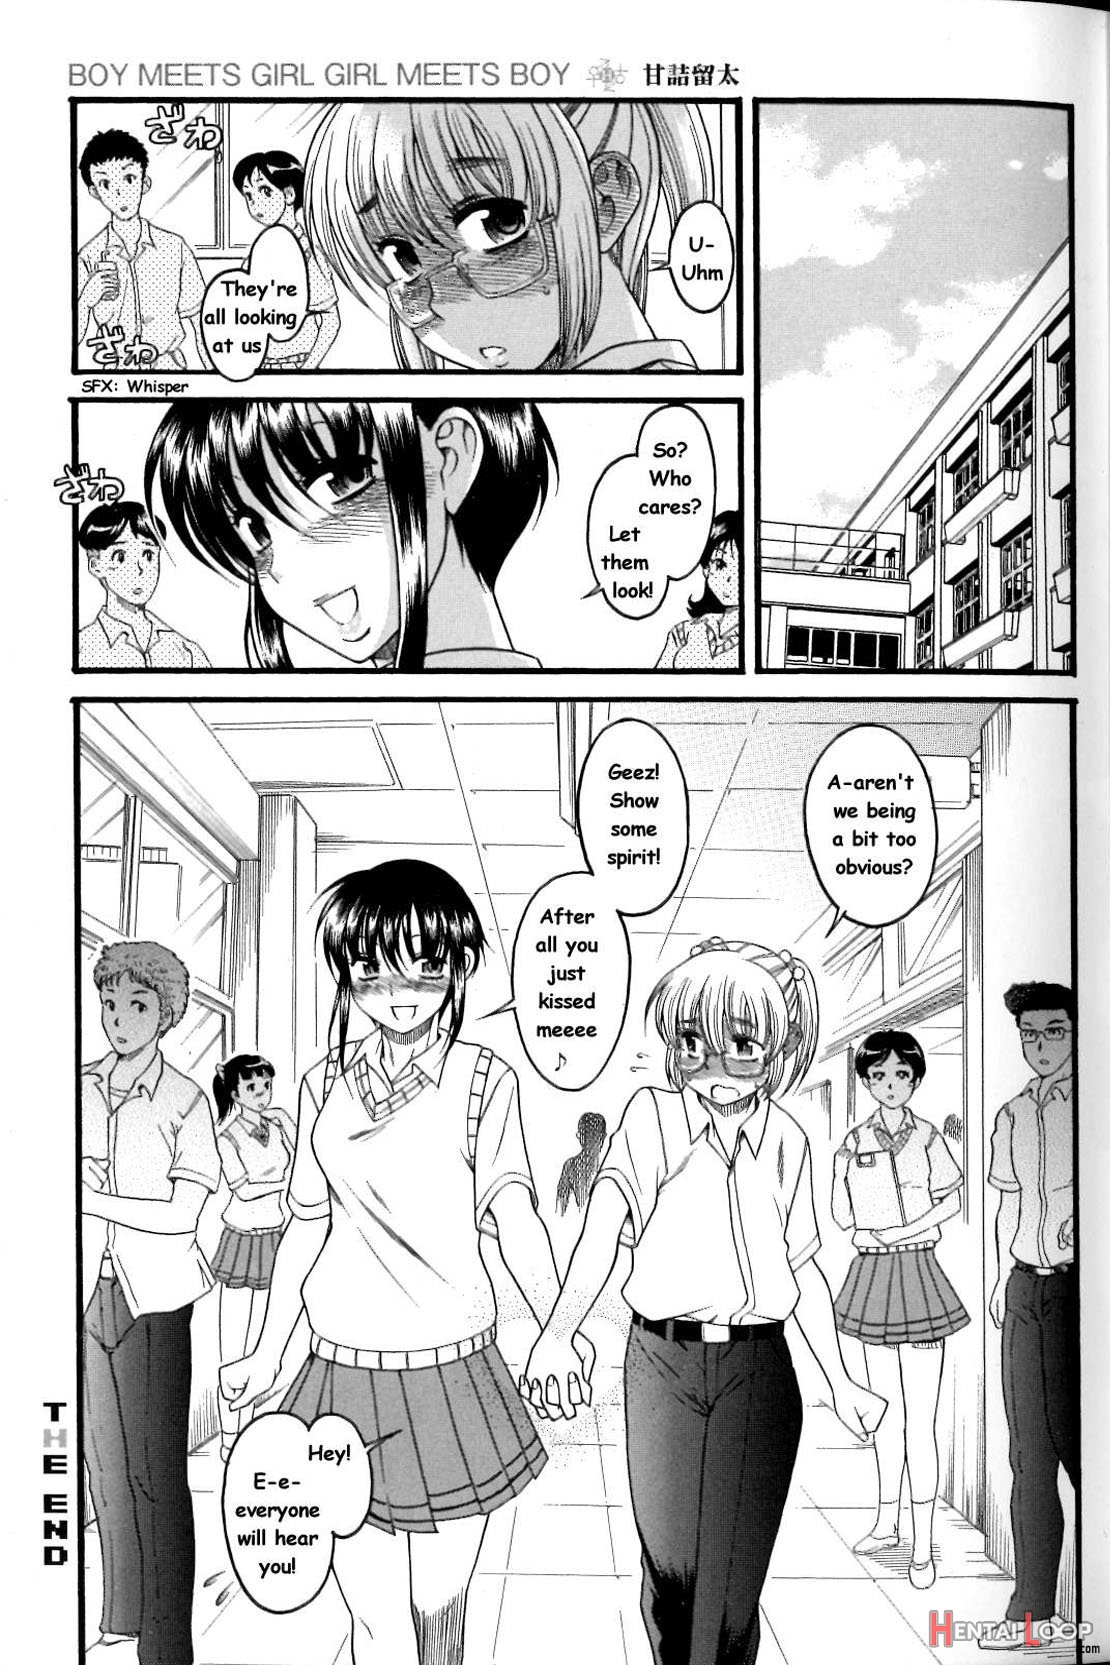 Boy Meets Girl, Girl Meets Boy 2- Single Page Version page 25